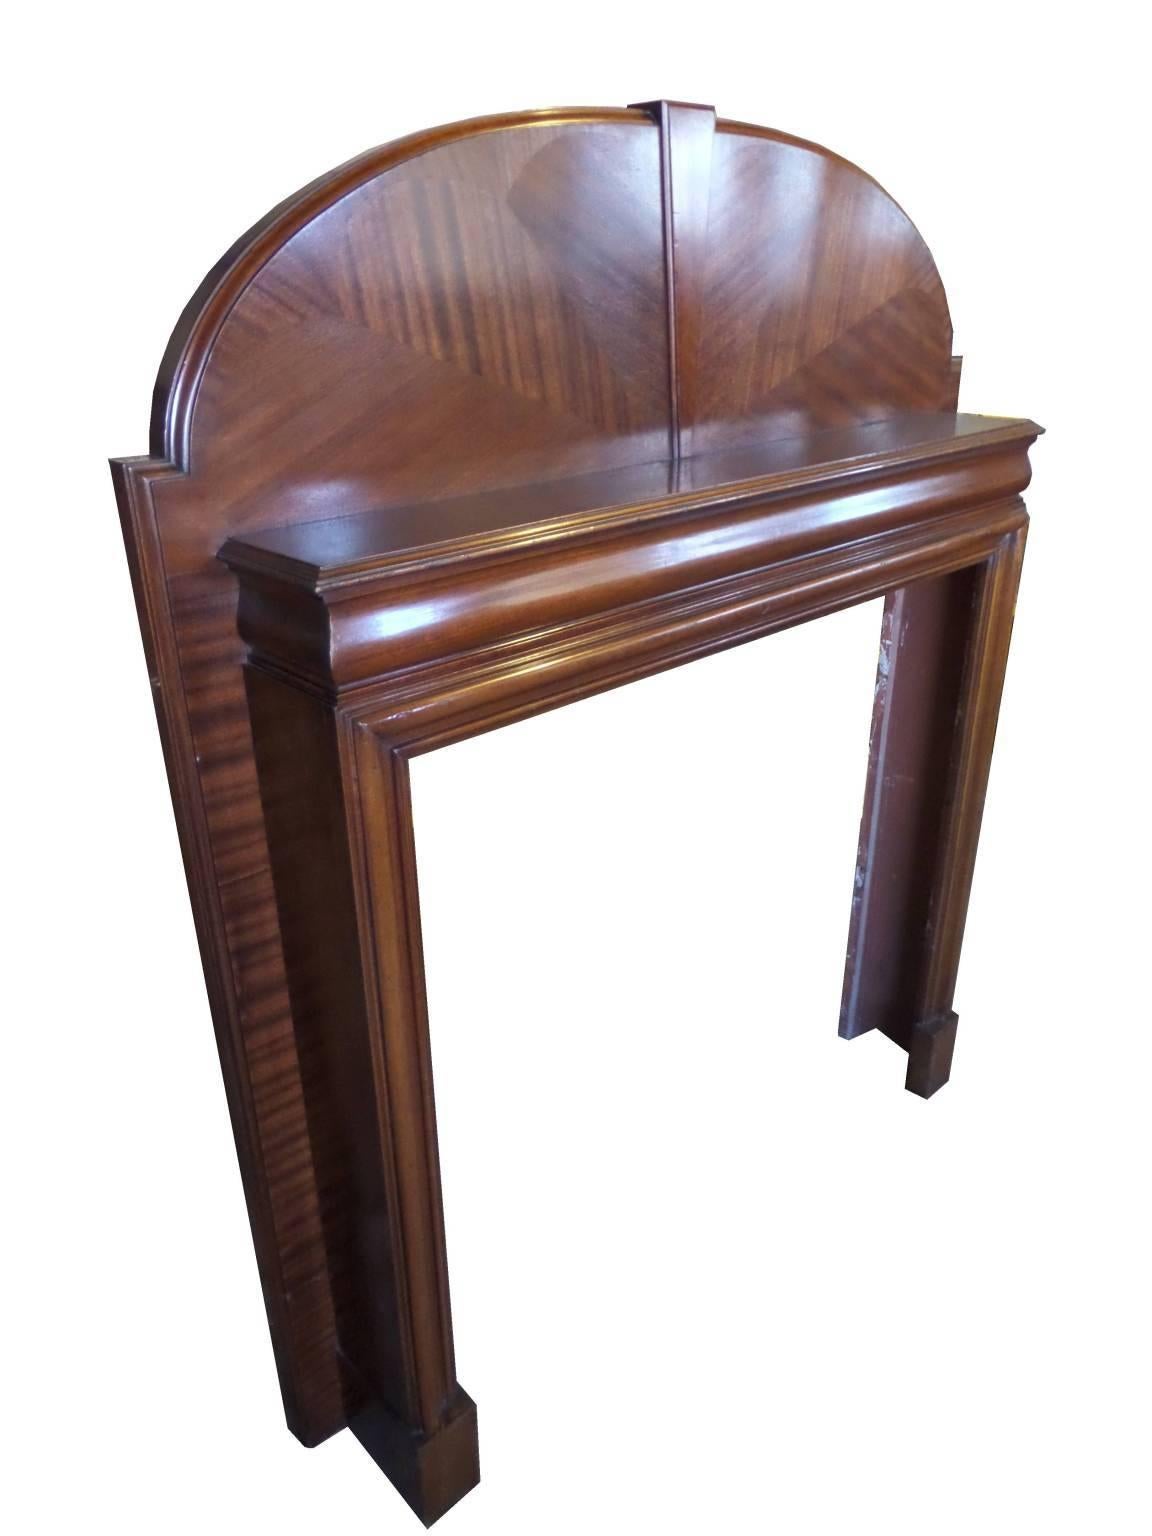 Antique restored Art Deco mahogany wood mantel. Deep rounded mahogany shaping typical of the art deco period. This mantel is shown with a retro Art Deco fire stainless insert also available on request and made to order.